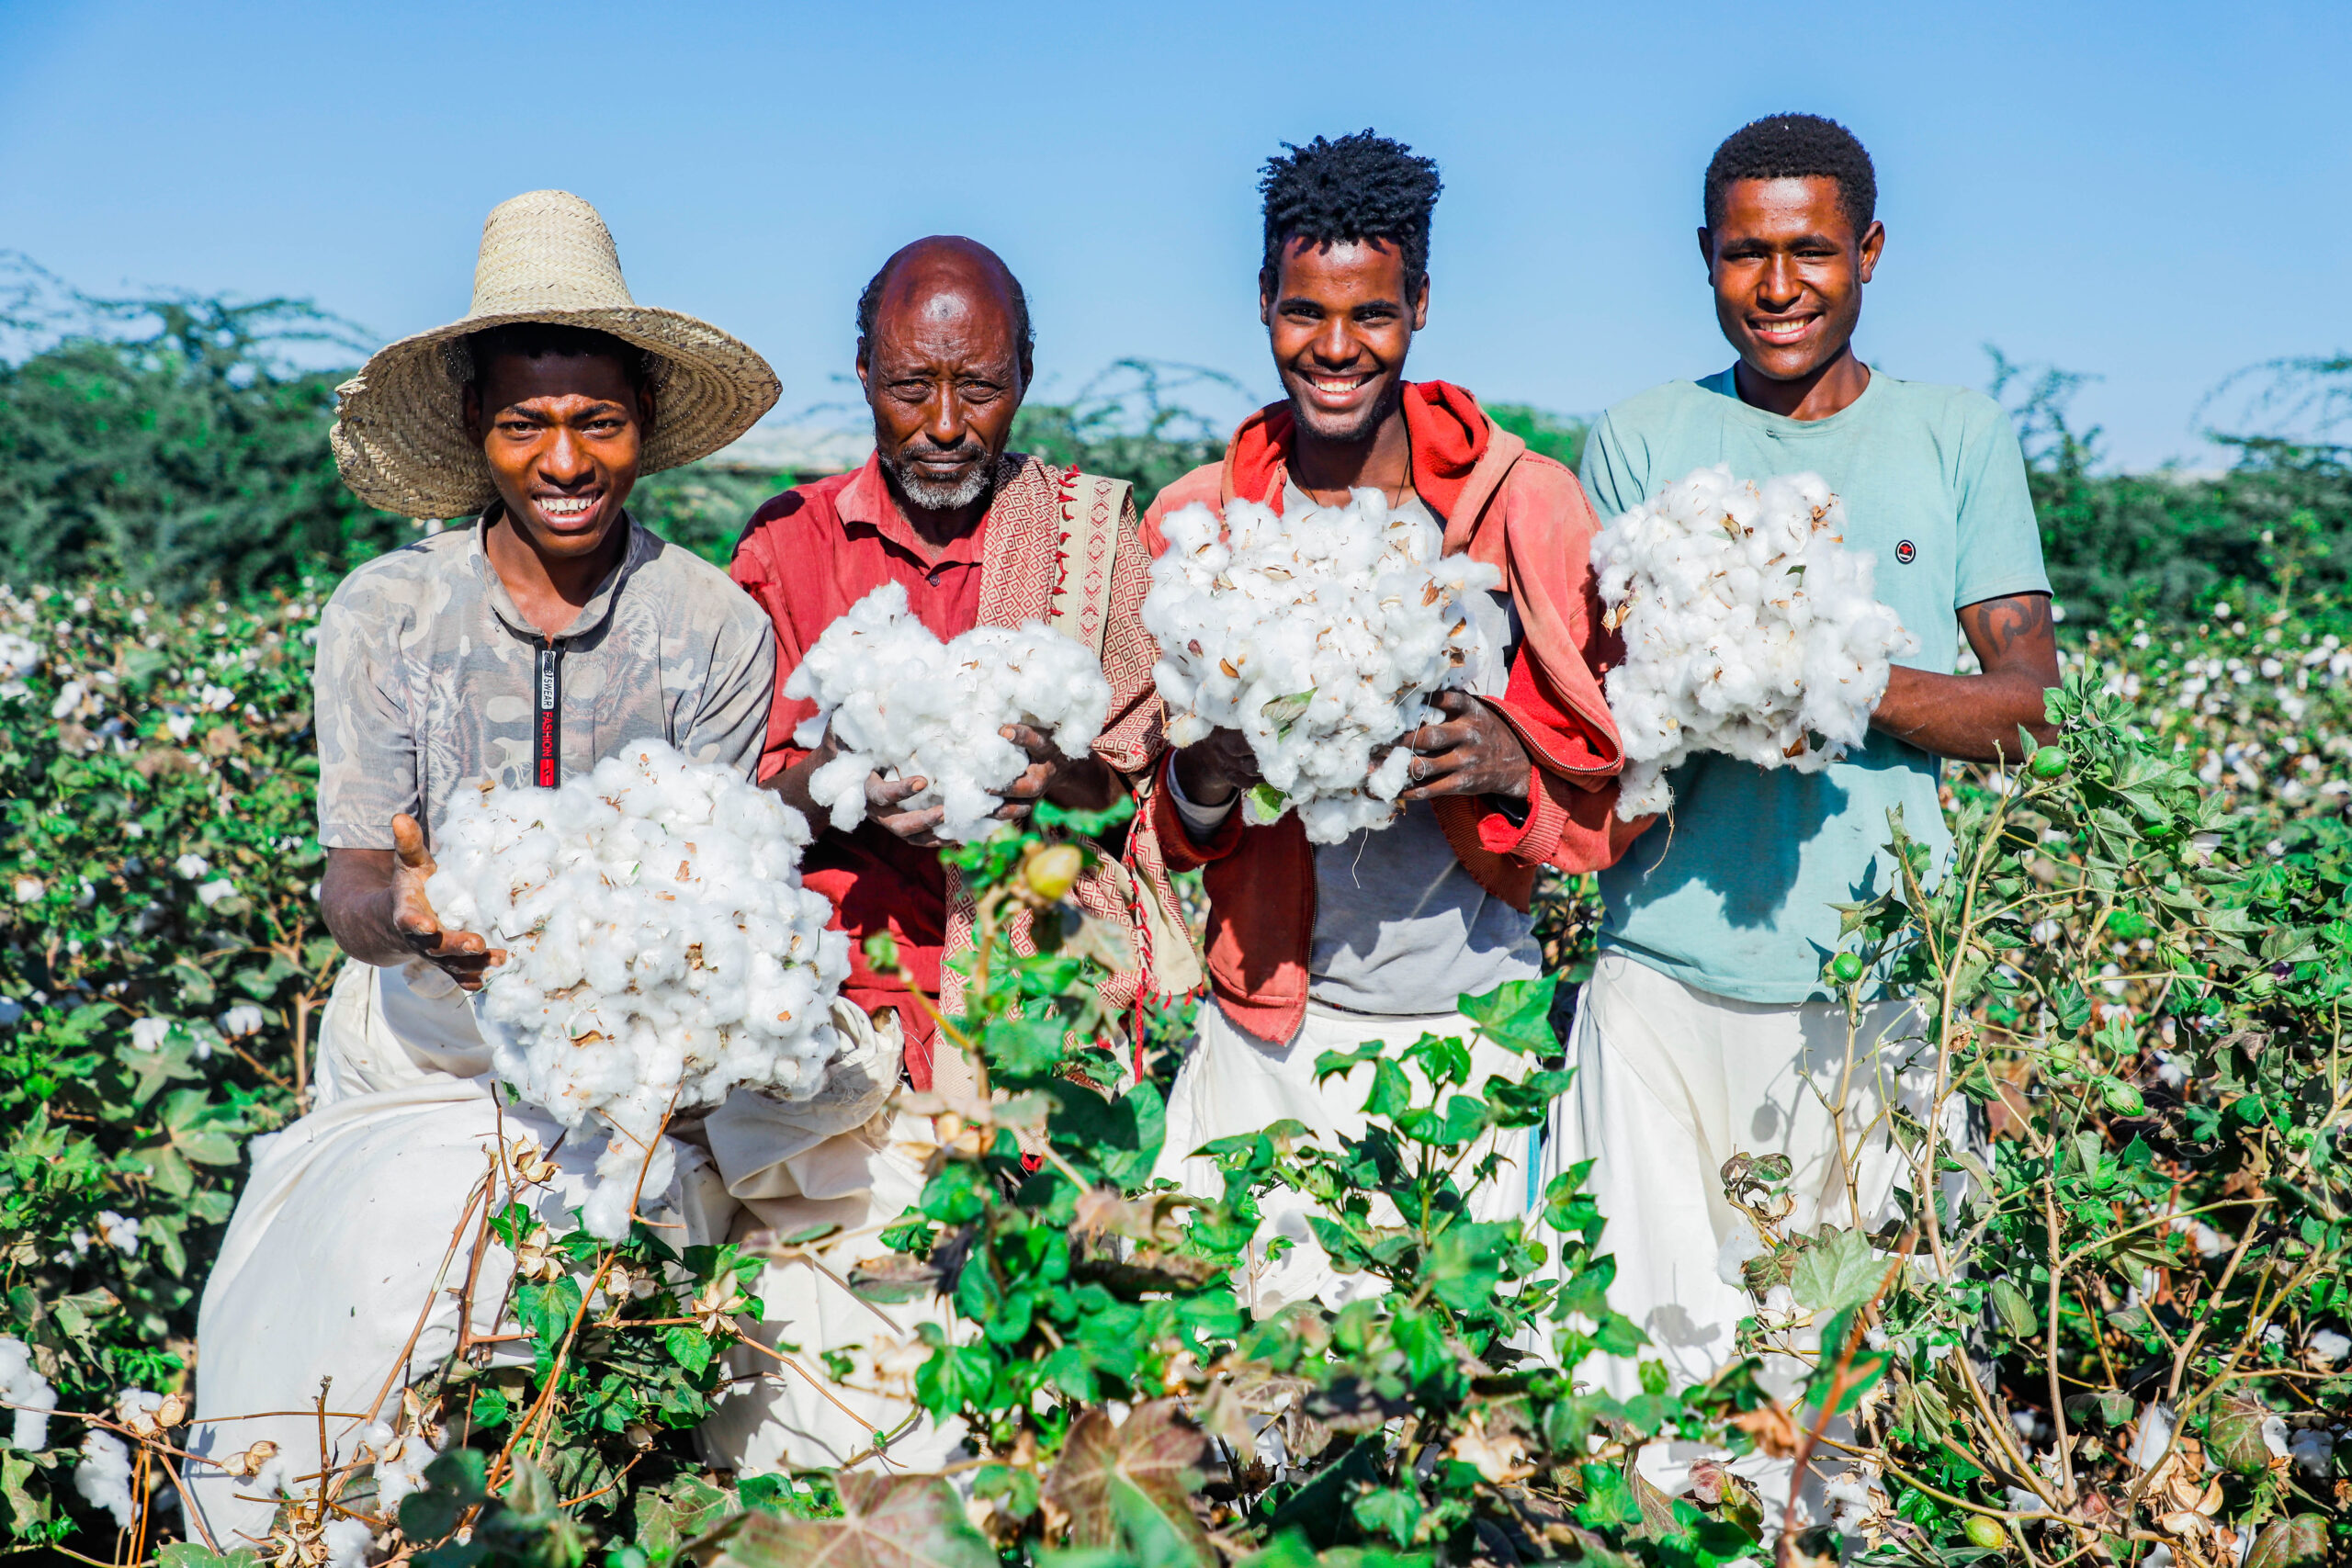 Farm workers picking cotton in Ethiopia